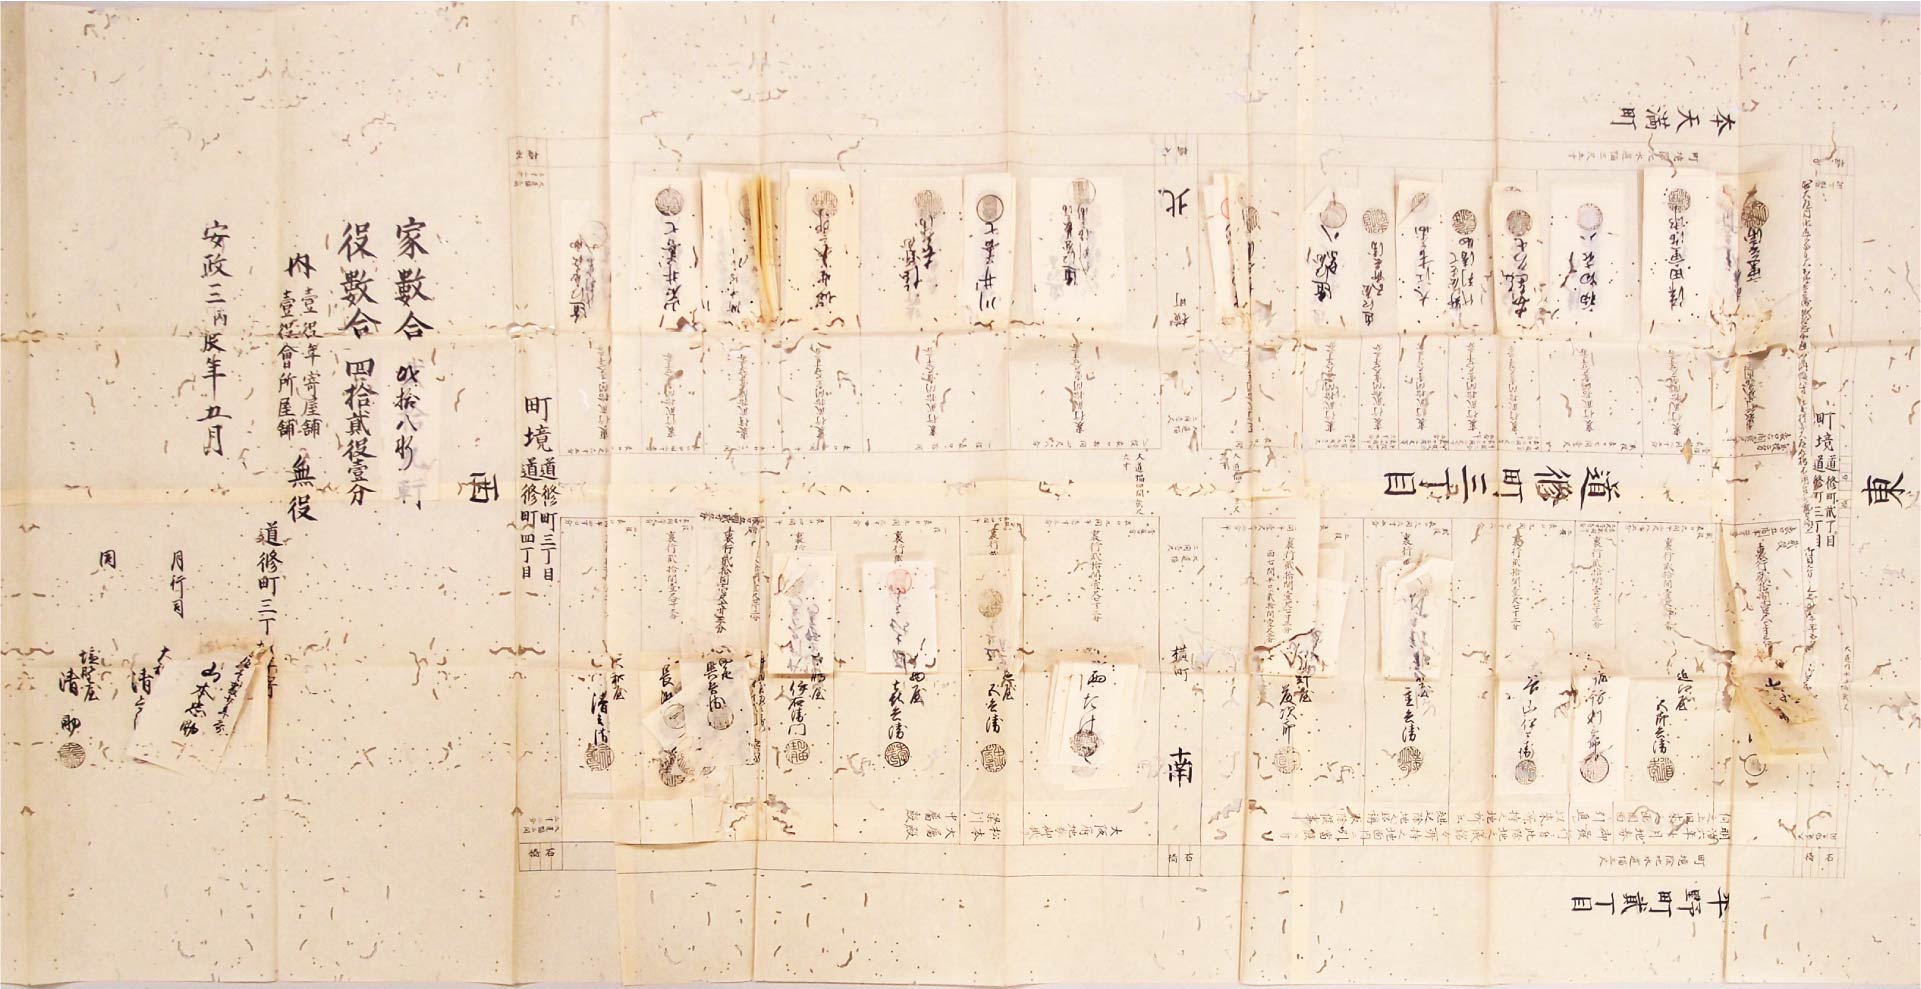 P01-03 – Lecture 3: Early Modern History III “The Urban Neighborhood: A Case Study of Doshōmachi 3-chōme”